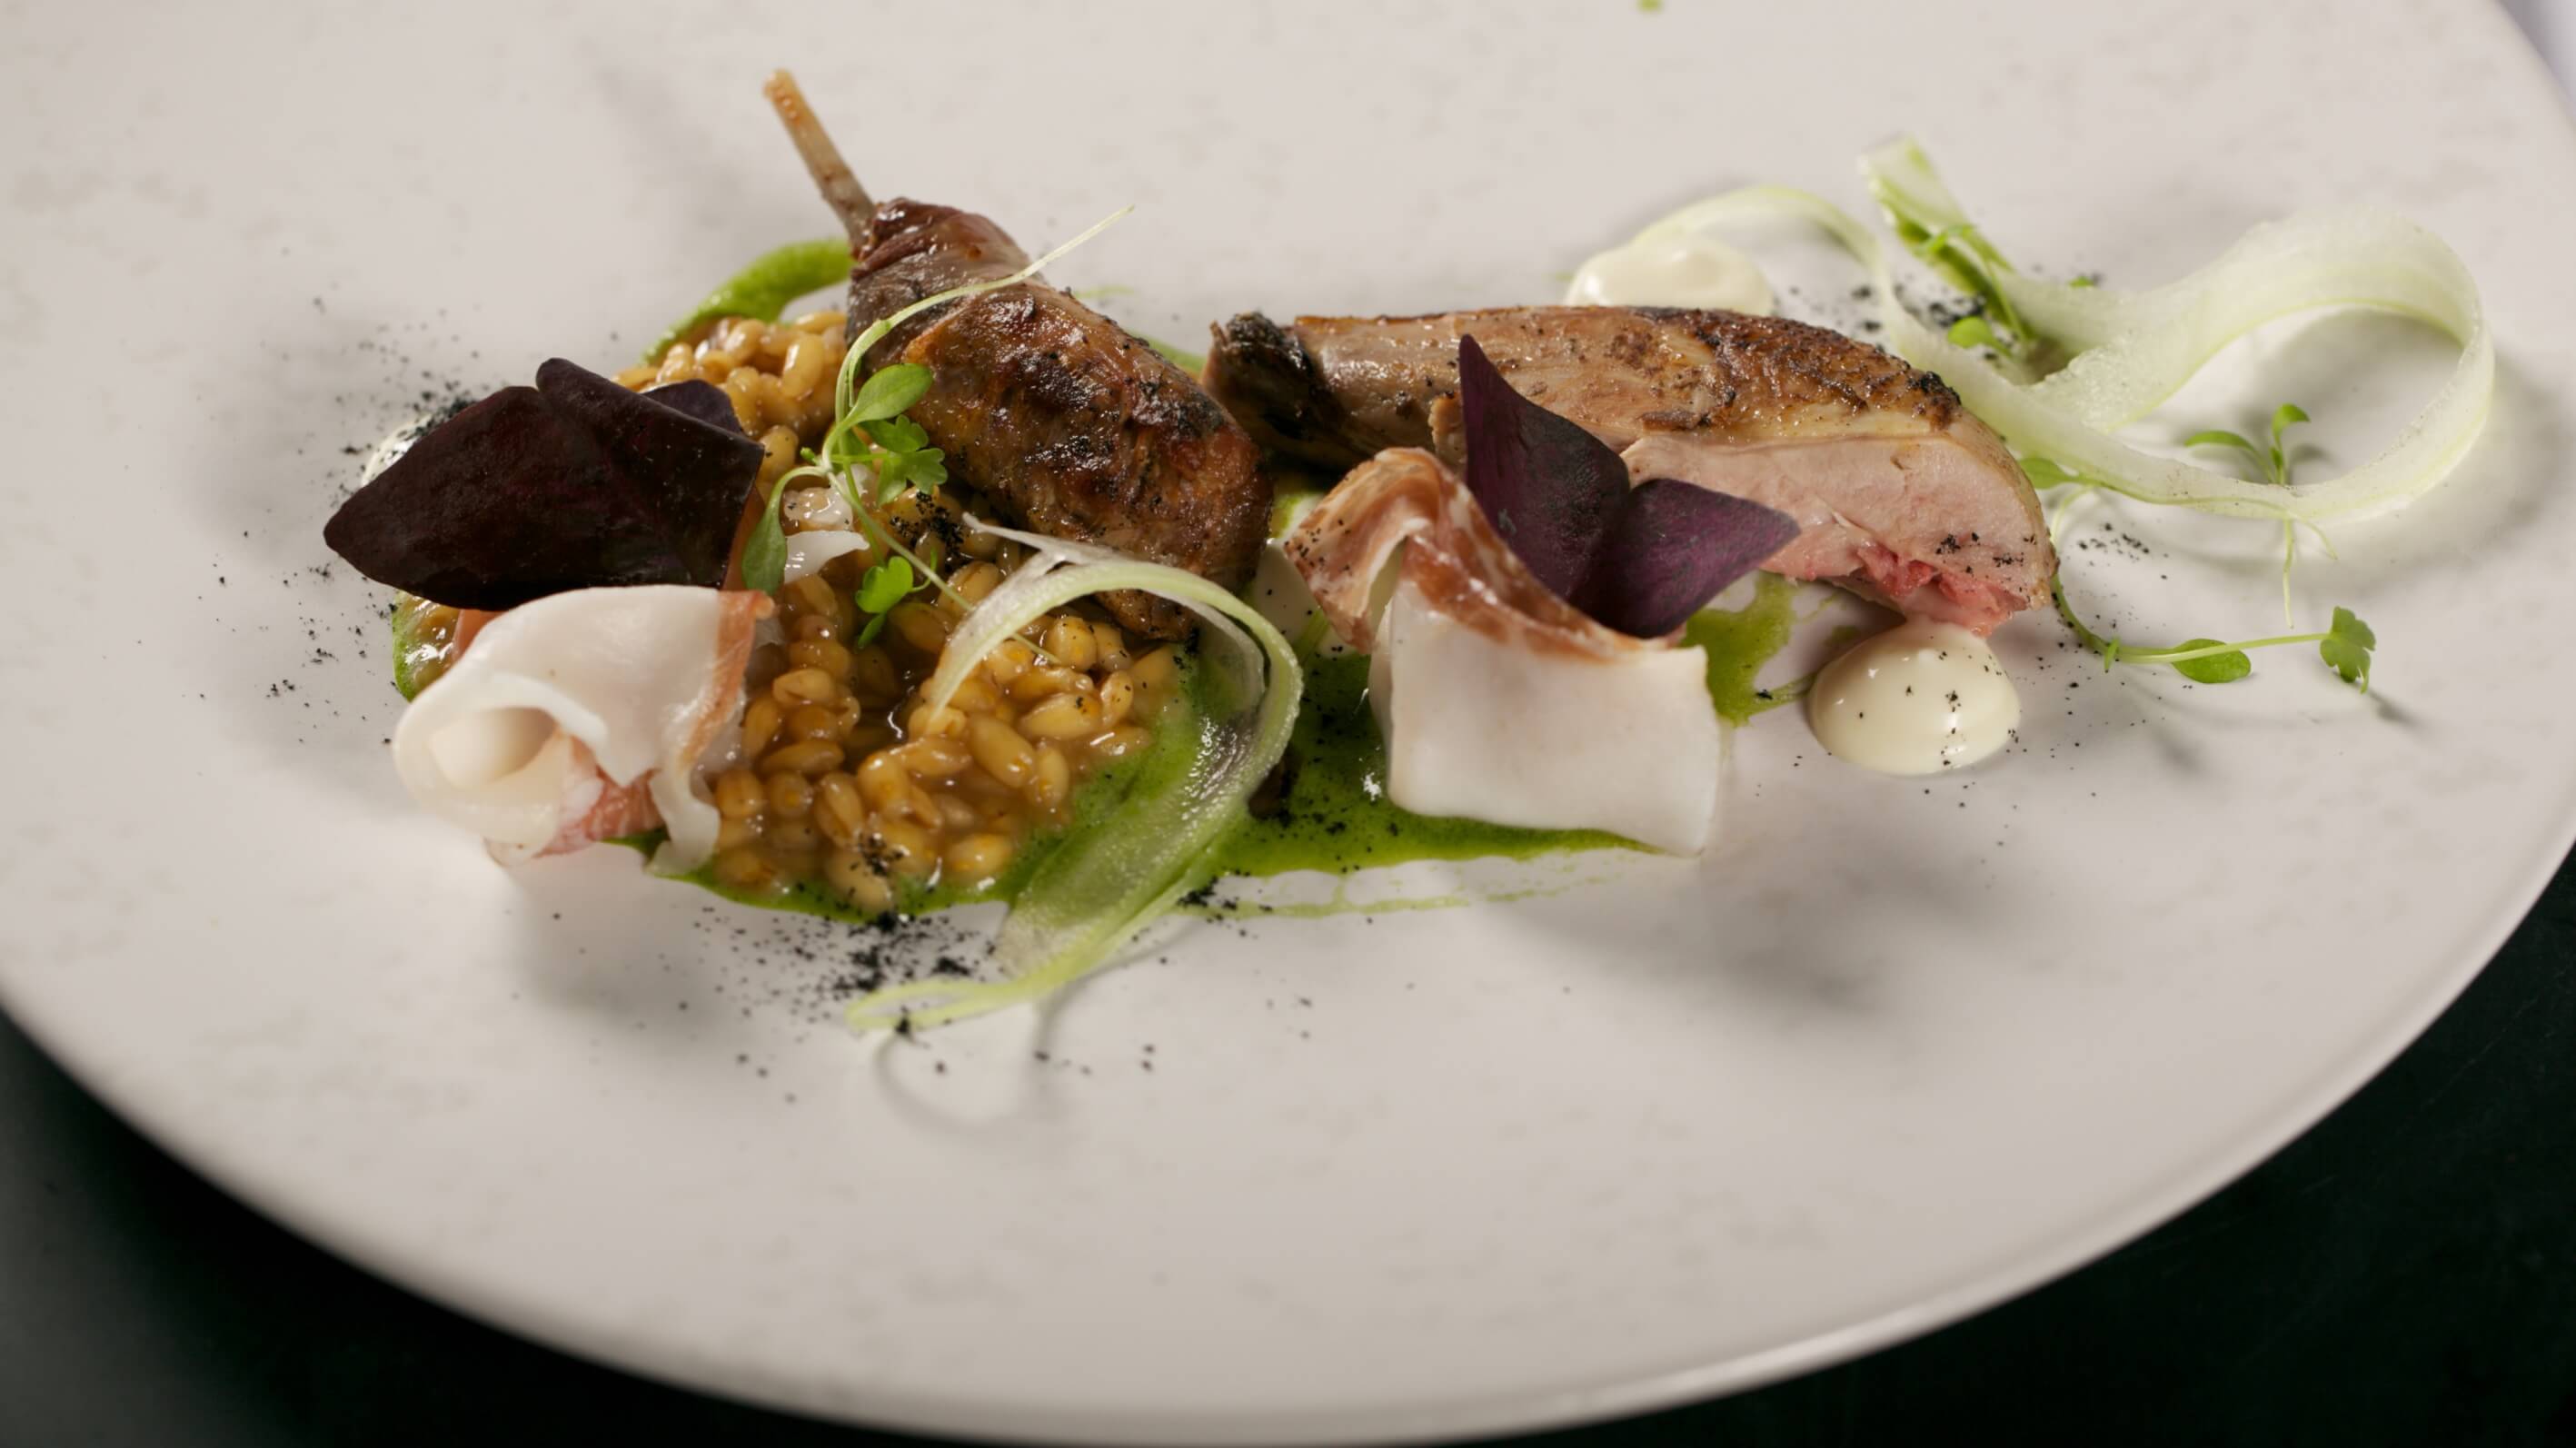 Breast and Leg of Partridge with Pickled Blackberry, Sorrel Emulsion, Pearl Barley and Jus